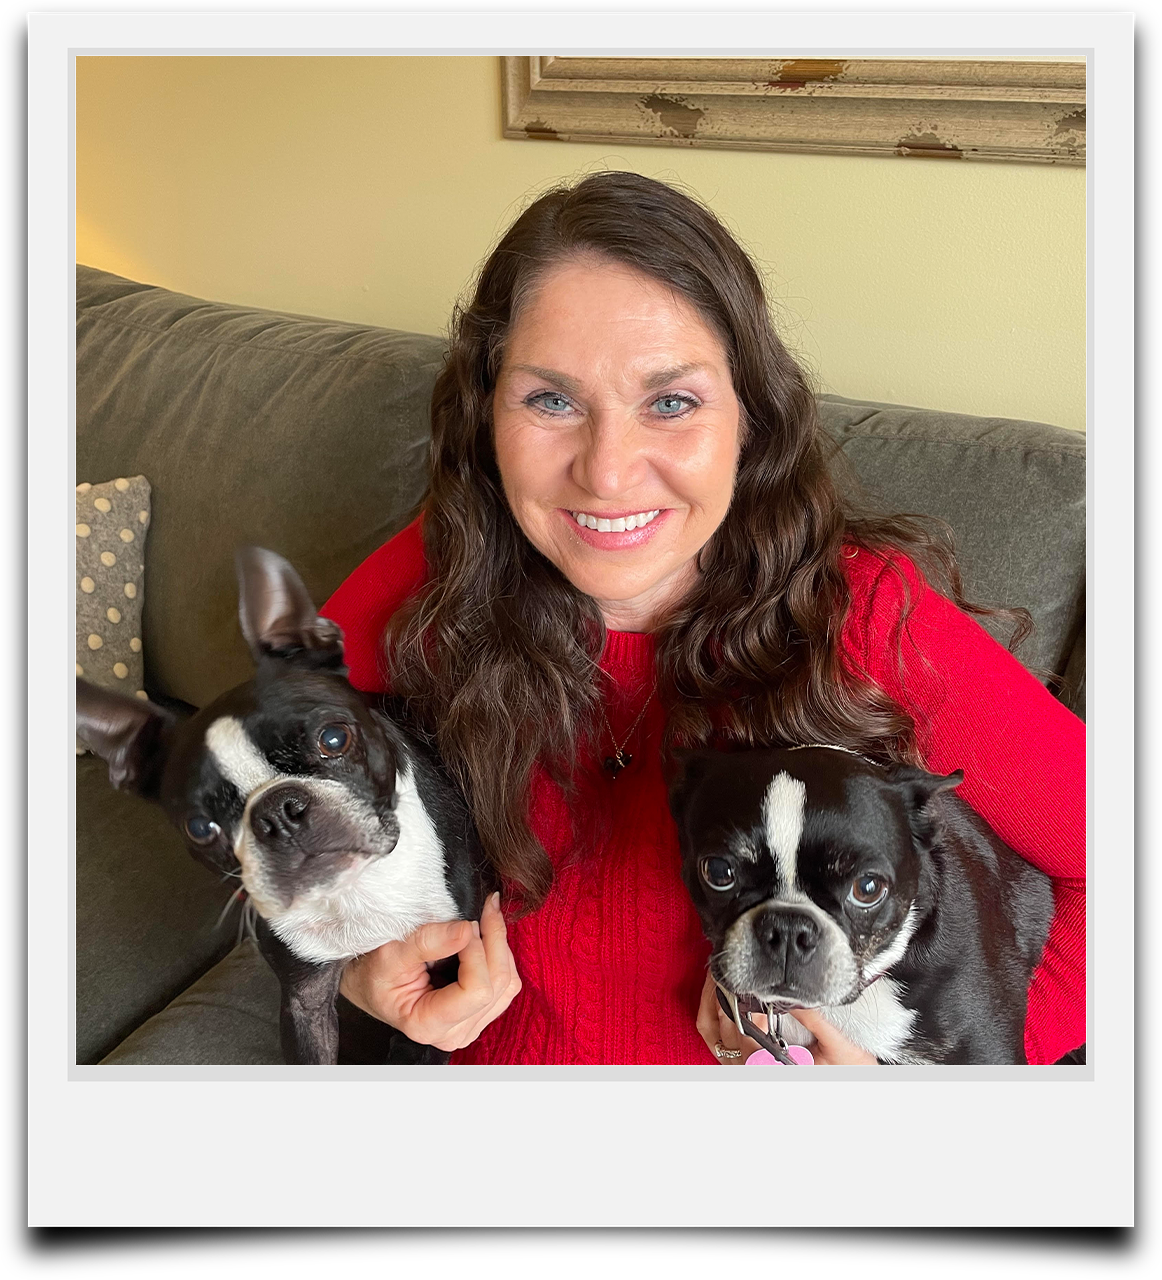 Jackie is a caregiver with Auntie Abby's Professional Pet Sitting pictured with her two Boston Terriers